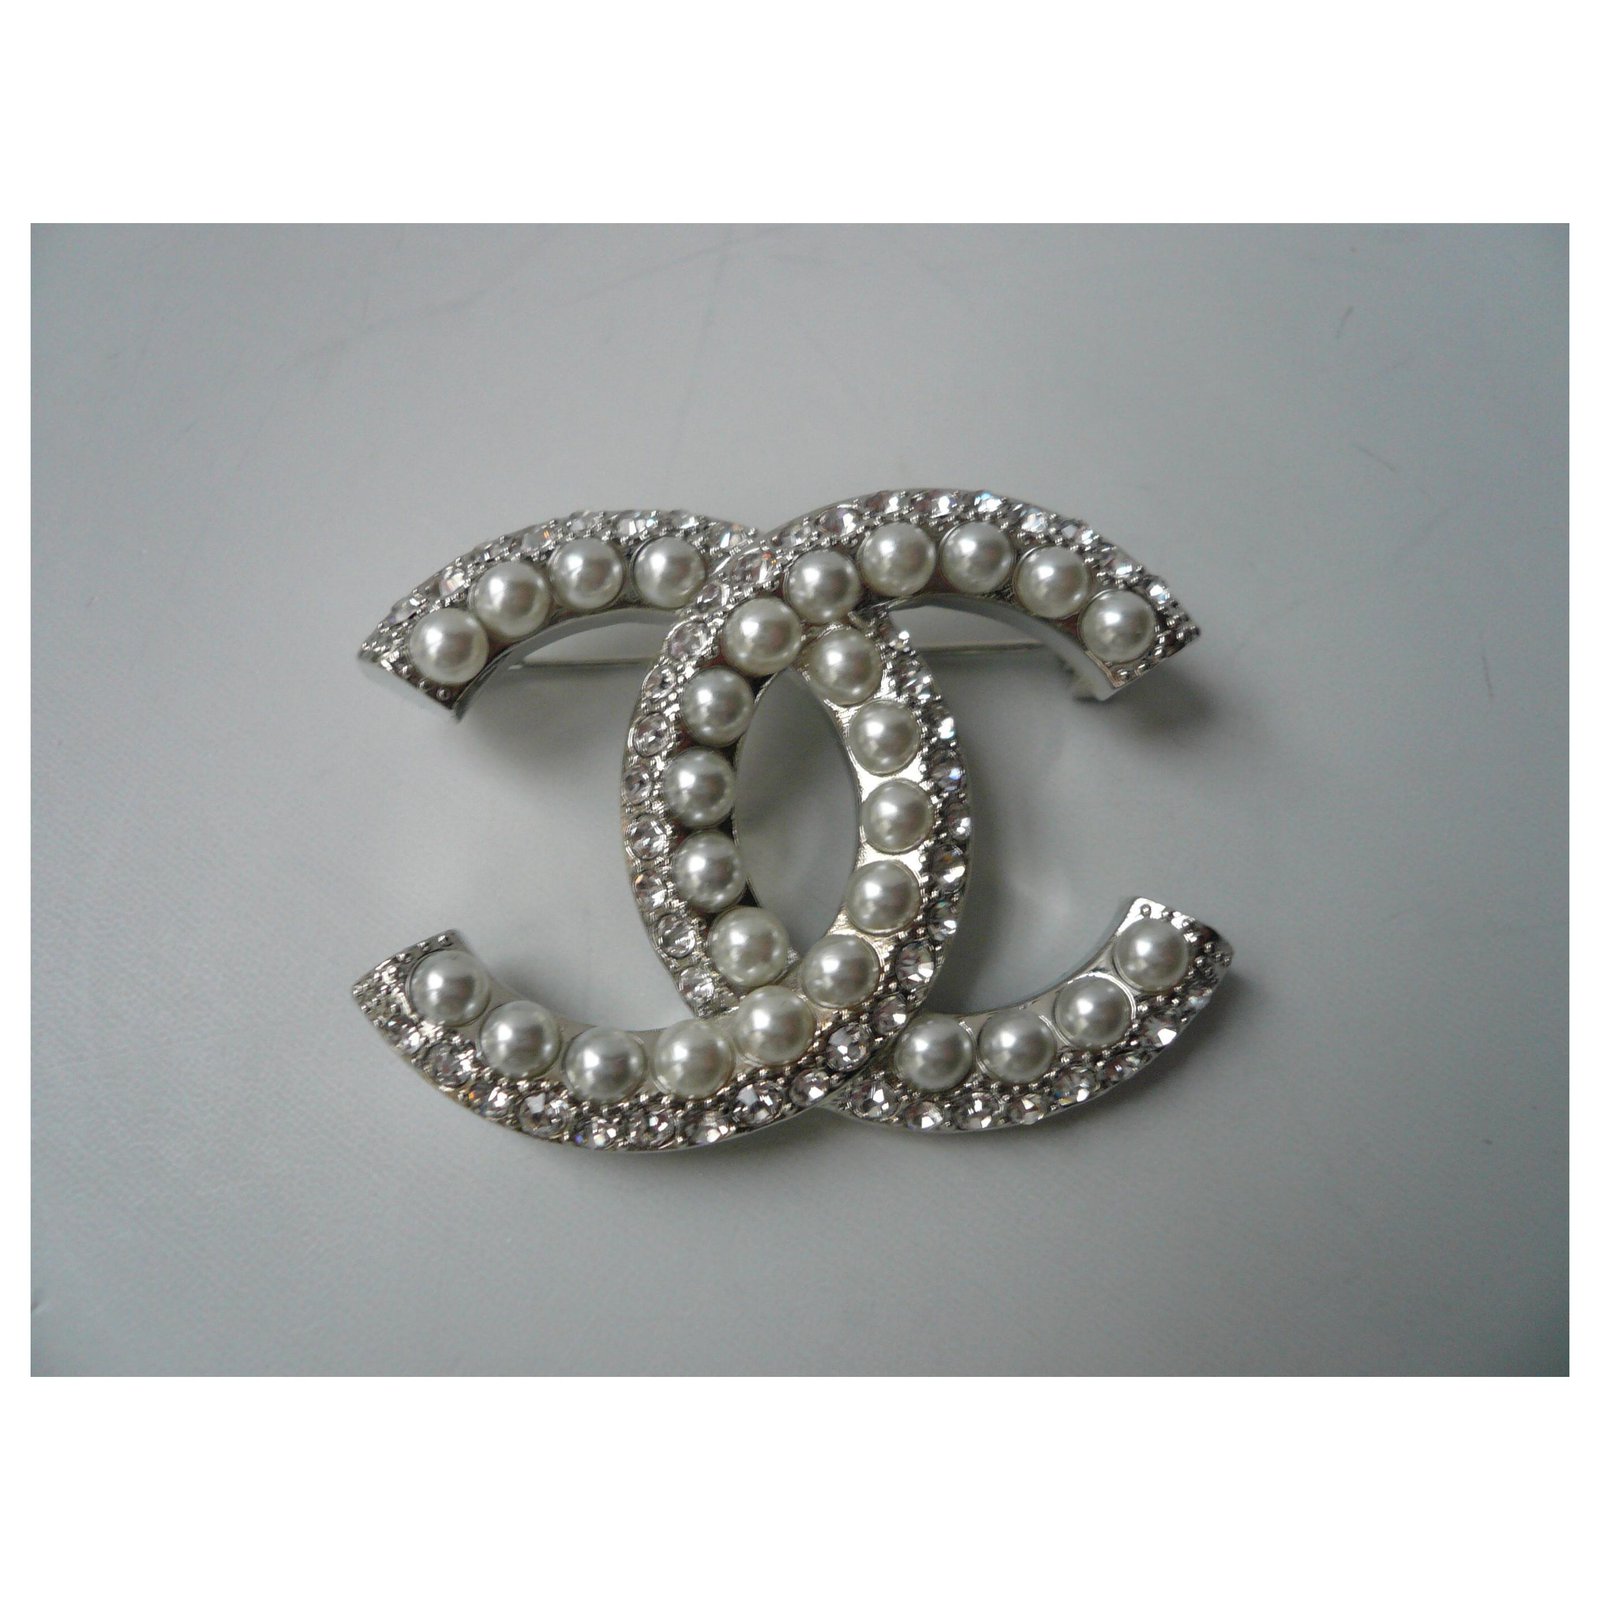 Chanel metal CC brooch with glass beads embellishment